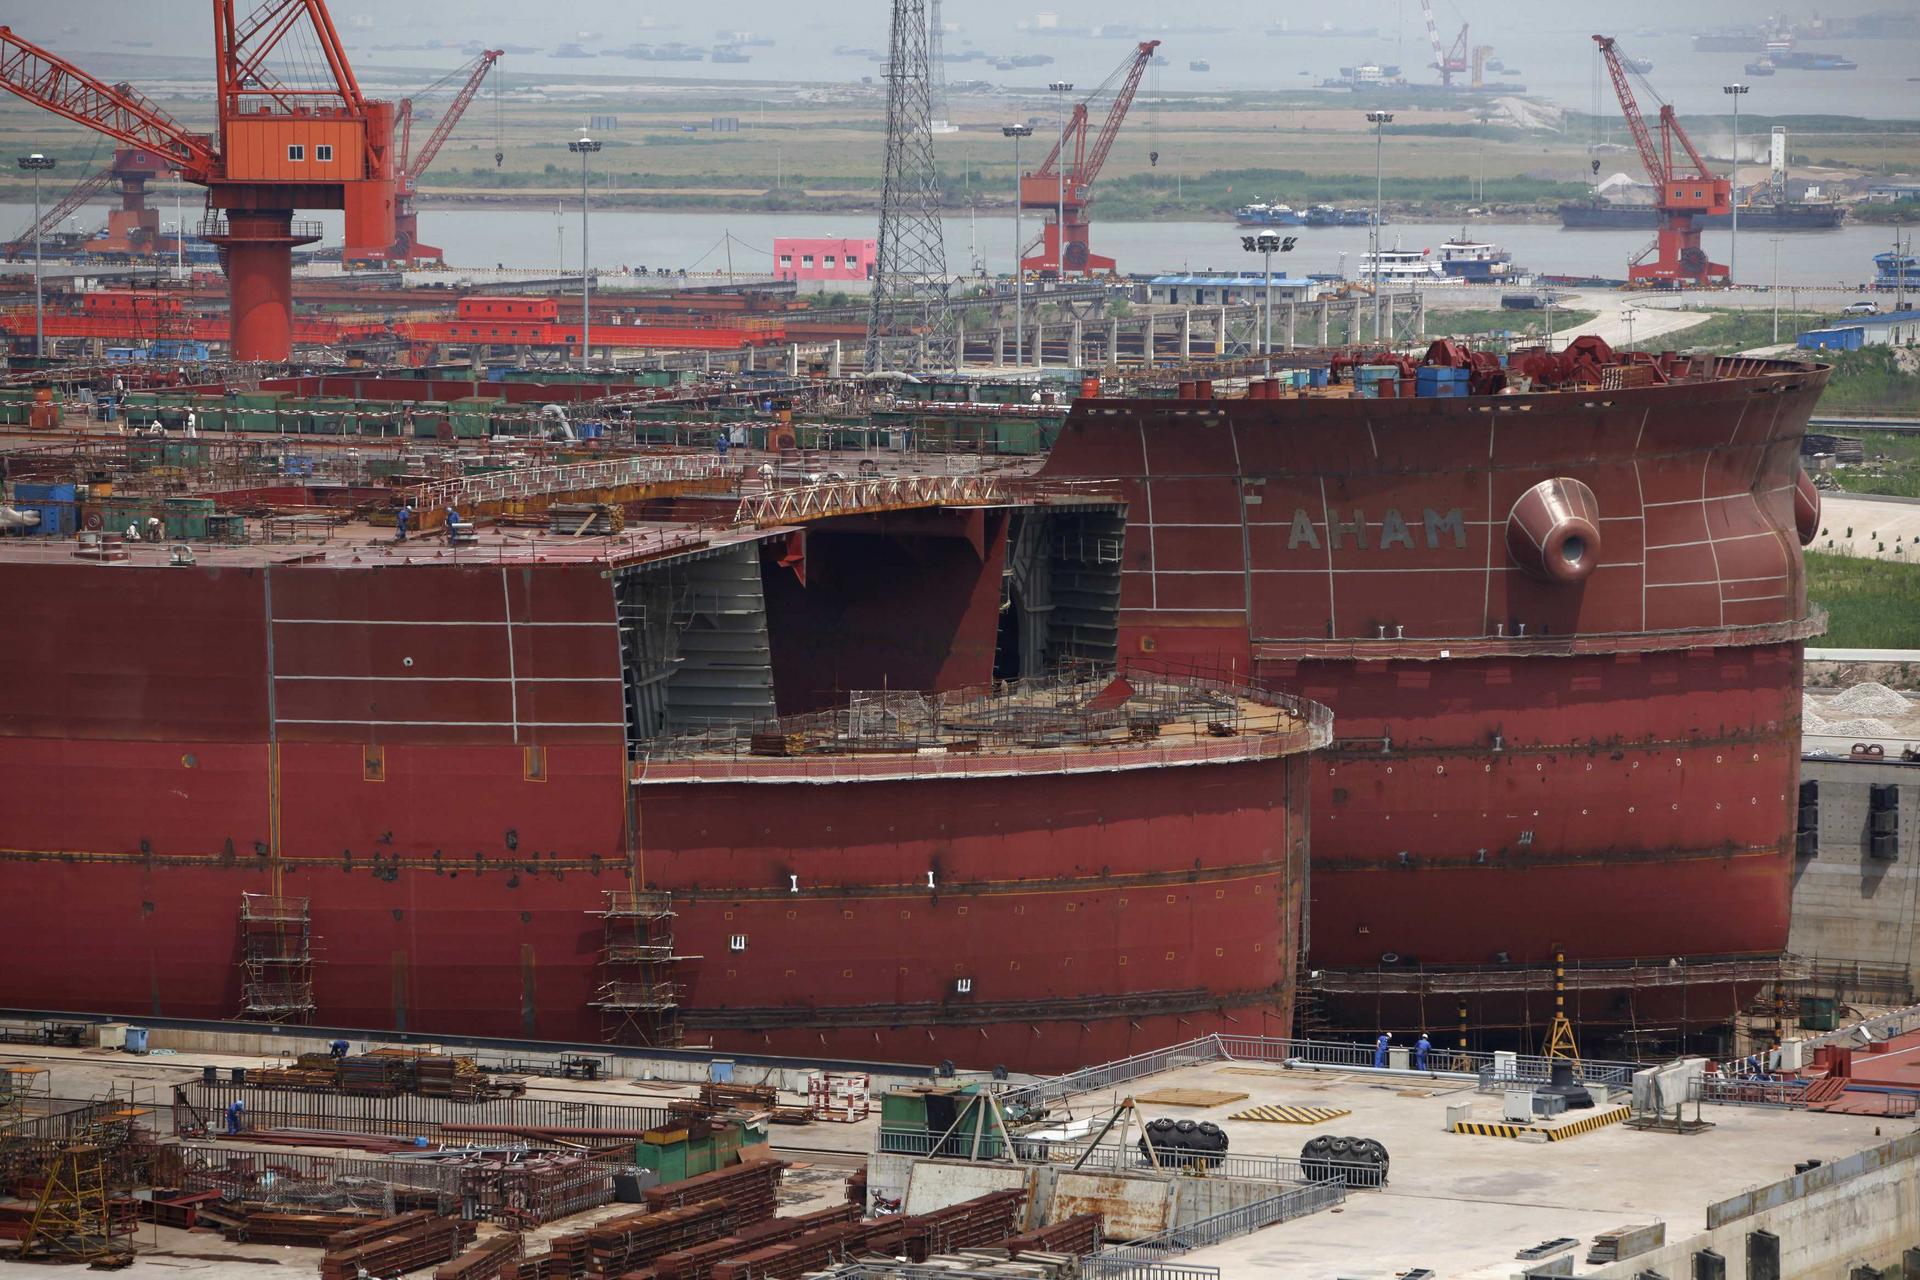 Rongsheng Heavy Industries is seeking an independent valuation of the assets held at its main shipyard in Jiangsu province. Photo: Reuters